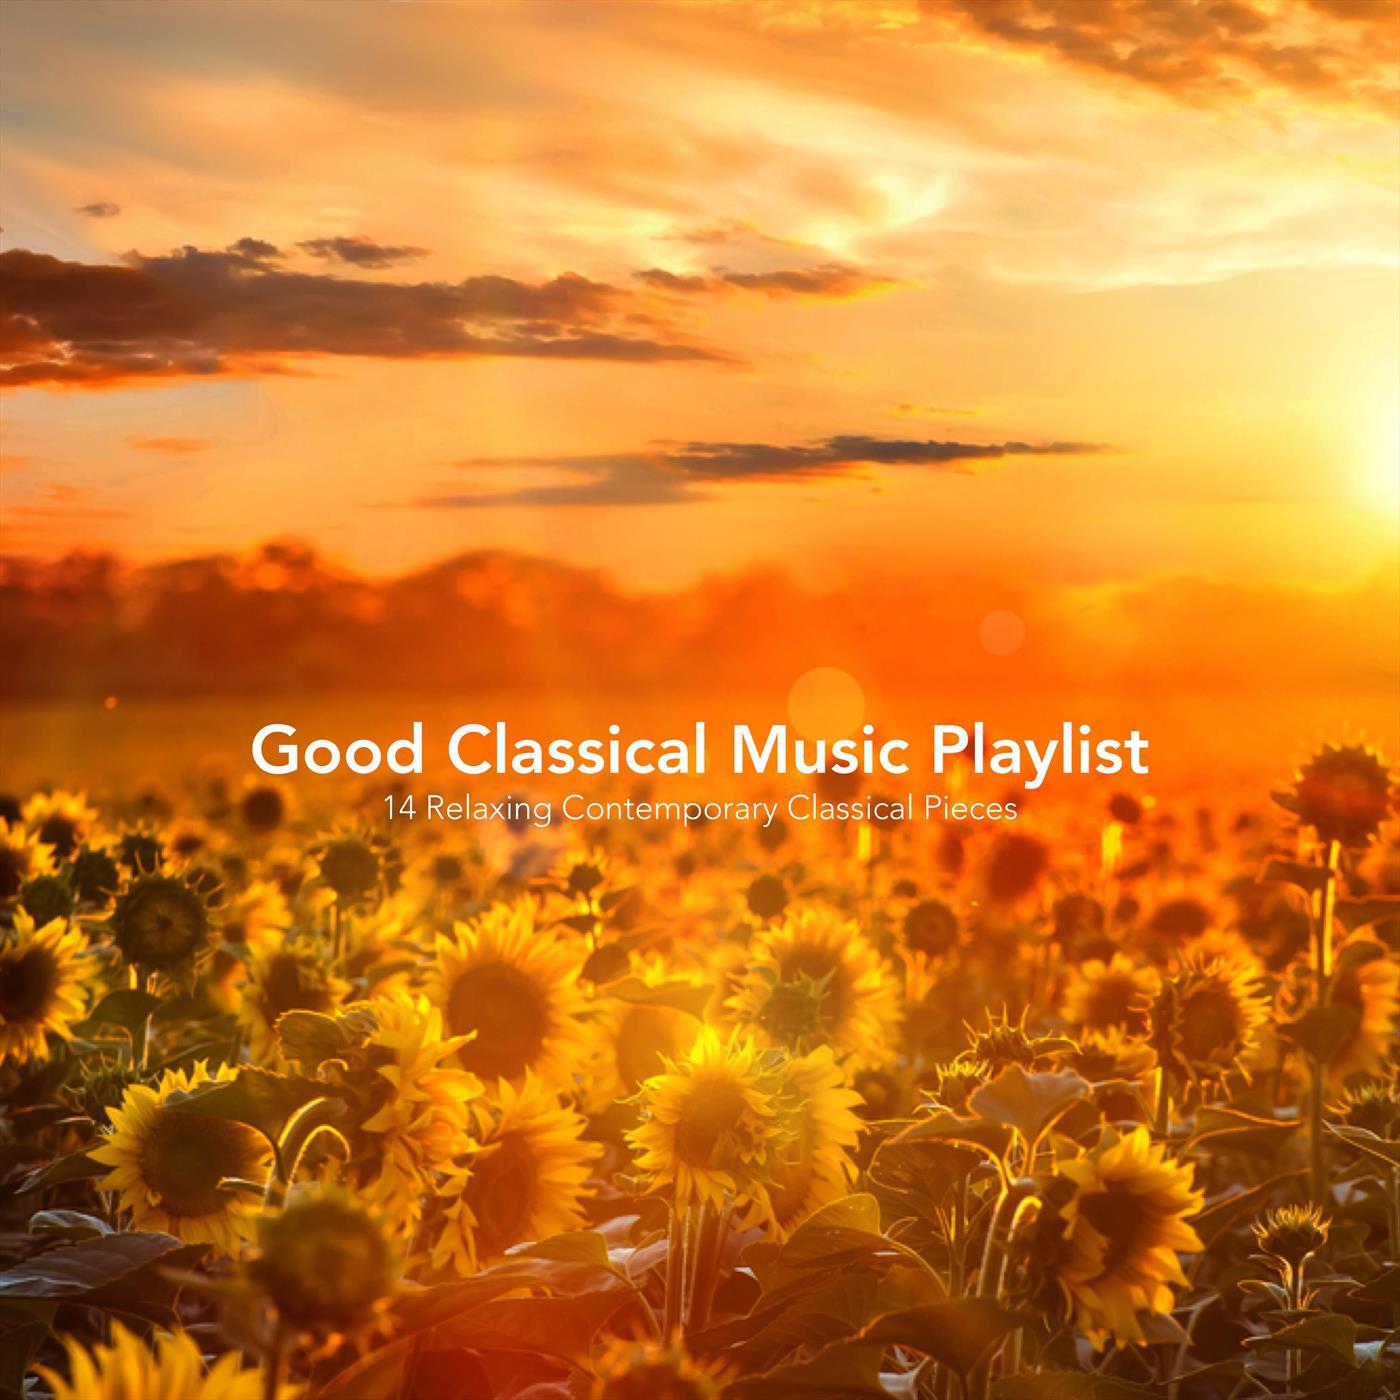 Good Classical Music Playlist: 14 Relaxing Contemporary Classical Pieces